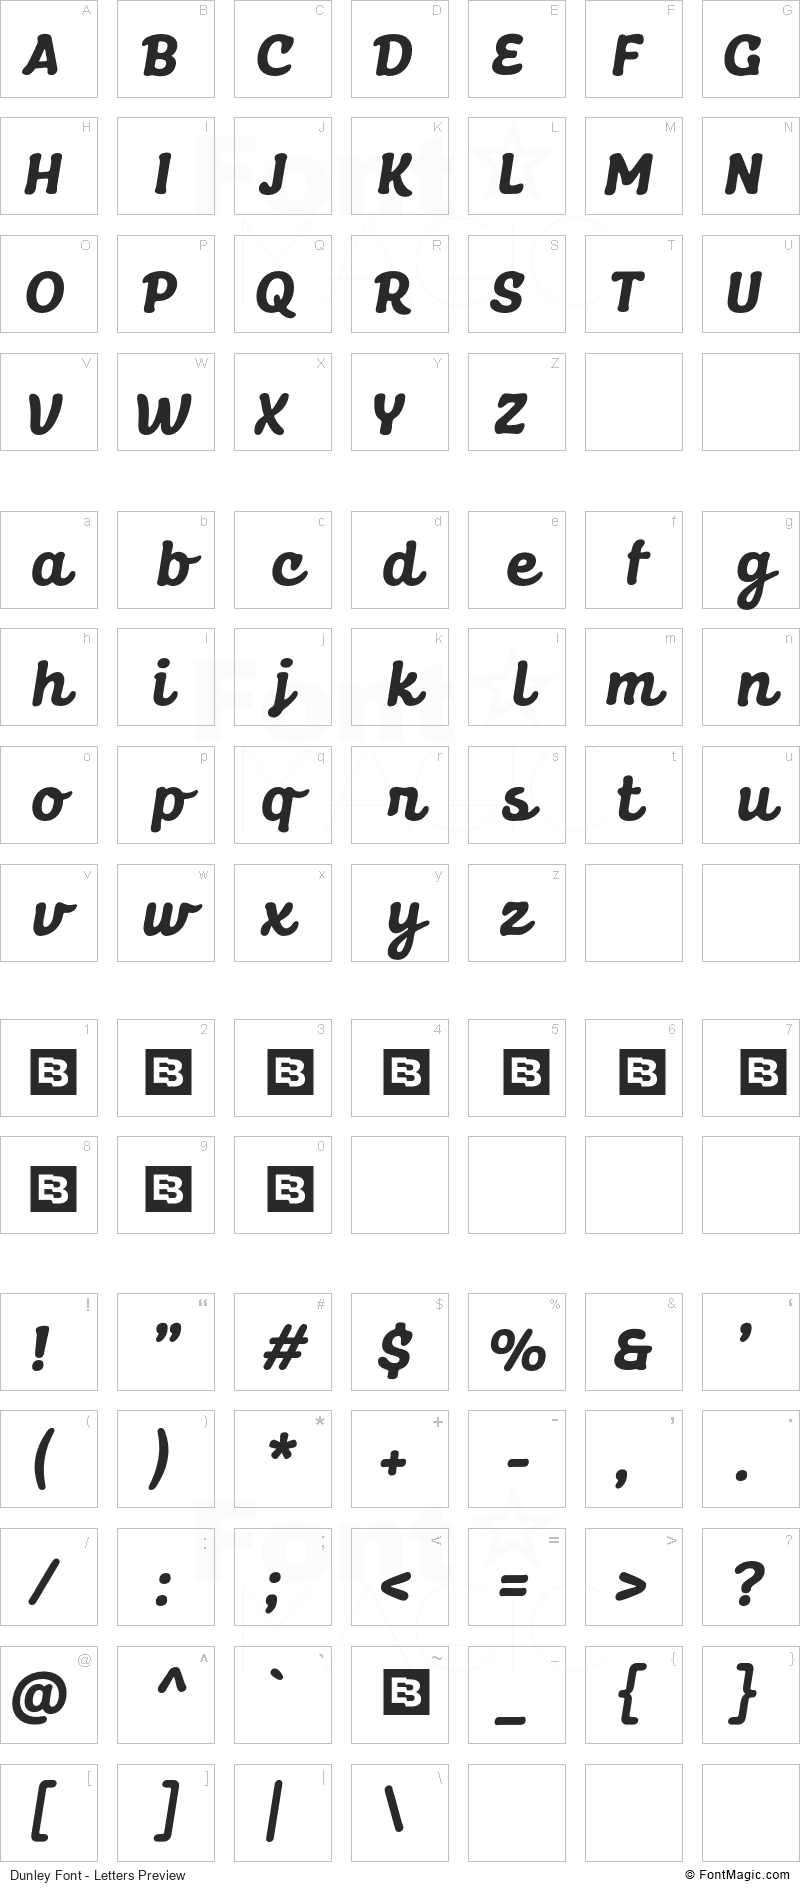 Dunley Font - All Latters Preview Chart